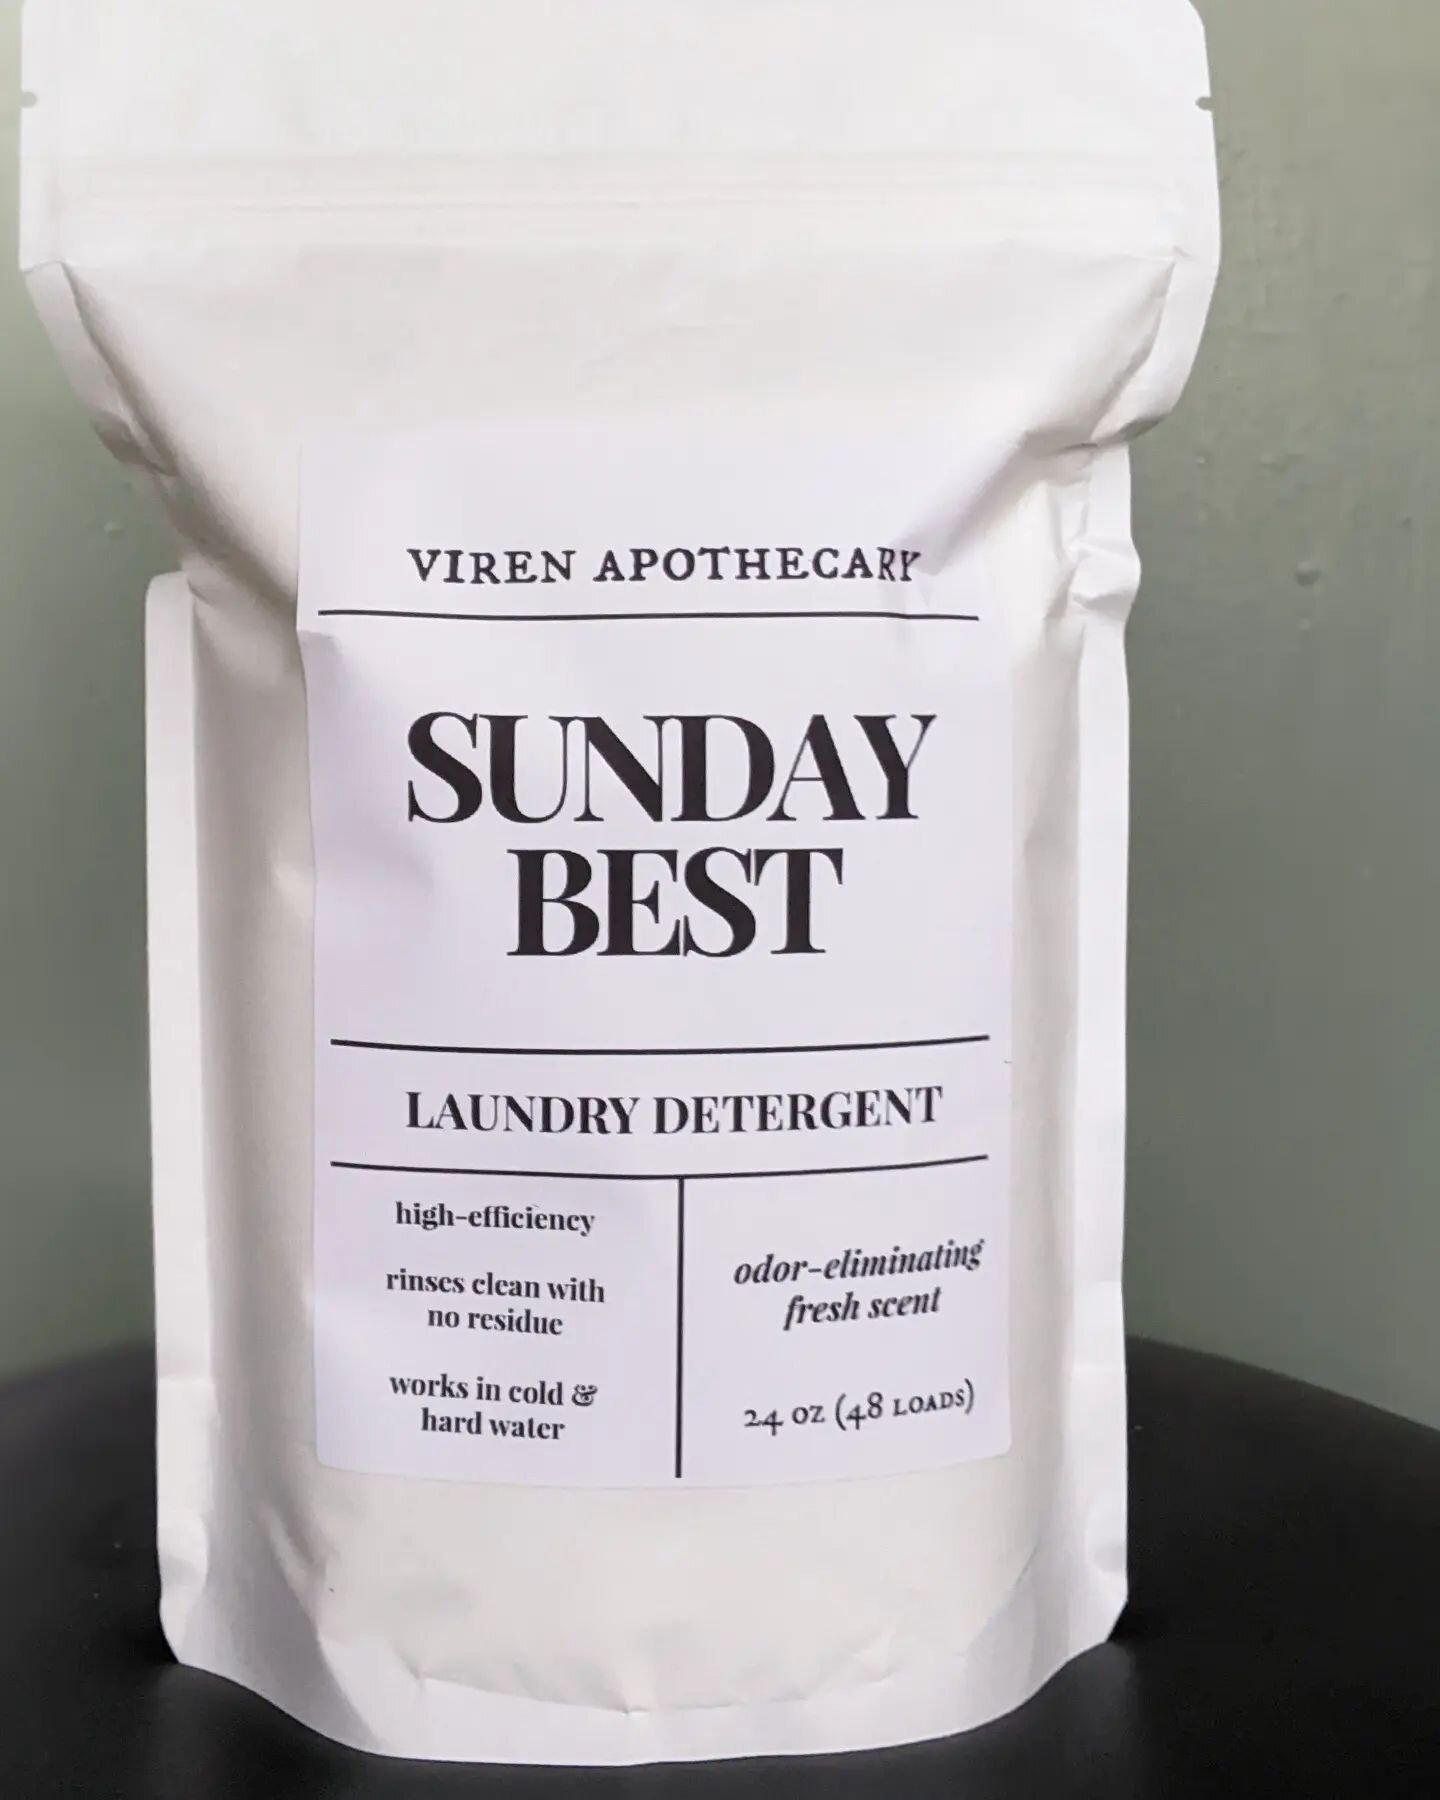 Introducing SUNDAY BEST laundry detergent!

We know how hard you worked to curate your sustainable closet, so we worked hard to formulate a way to clean your fits gently yet effectively.

With five different sulfate-free surfactants, it blows every o